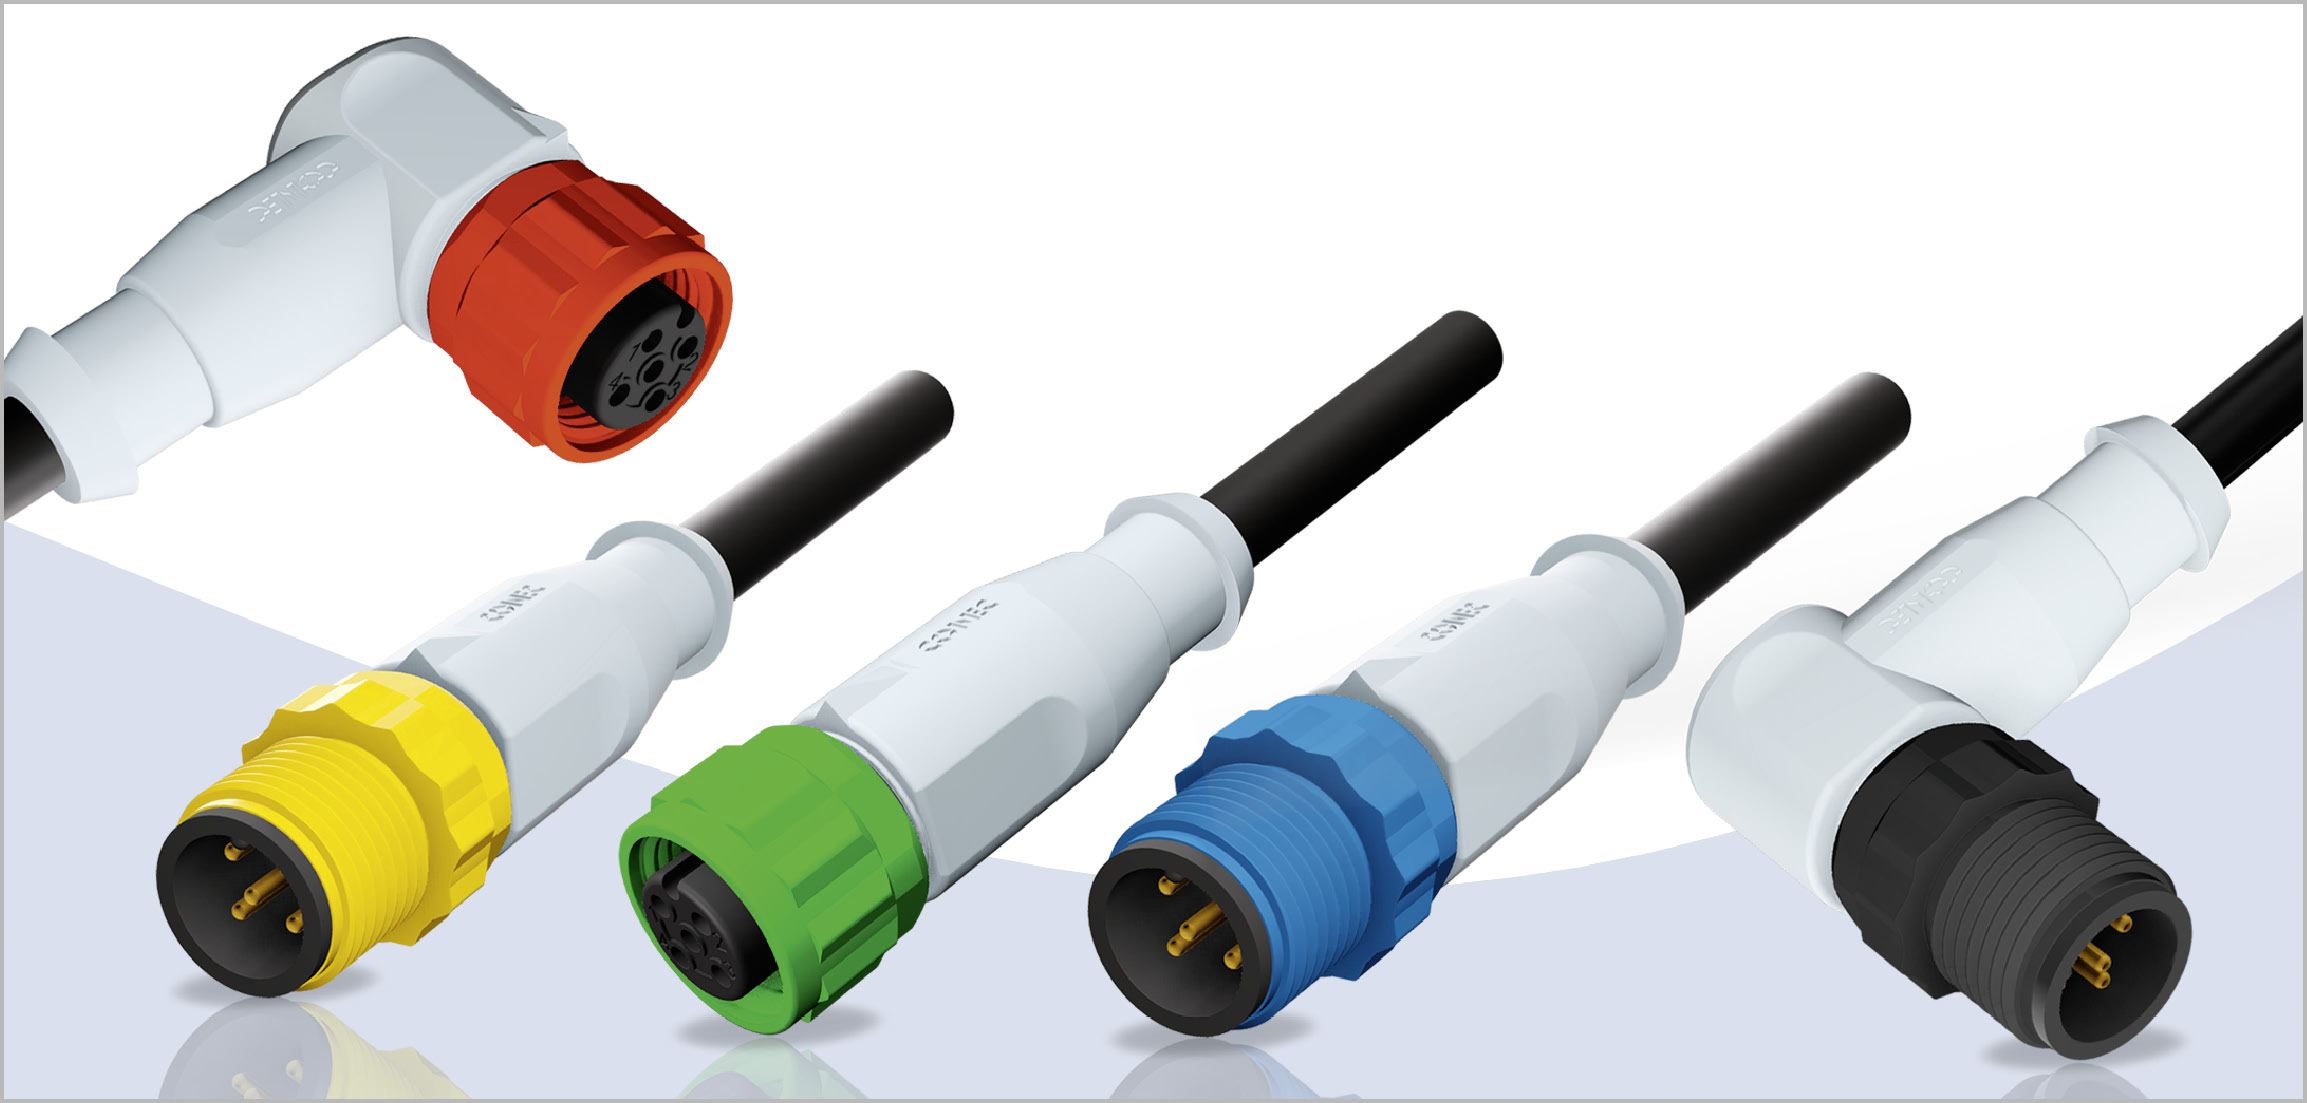 M12x1 Connectors overmoulded with coloured plastic coupling elements